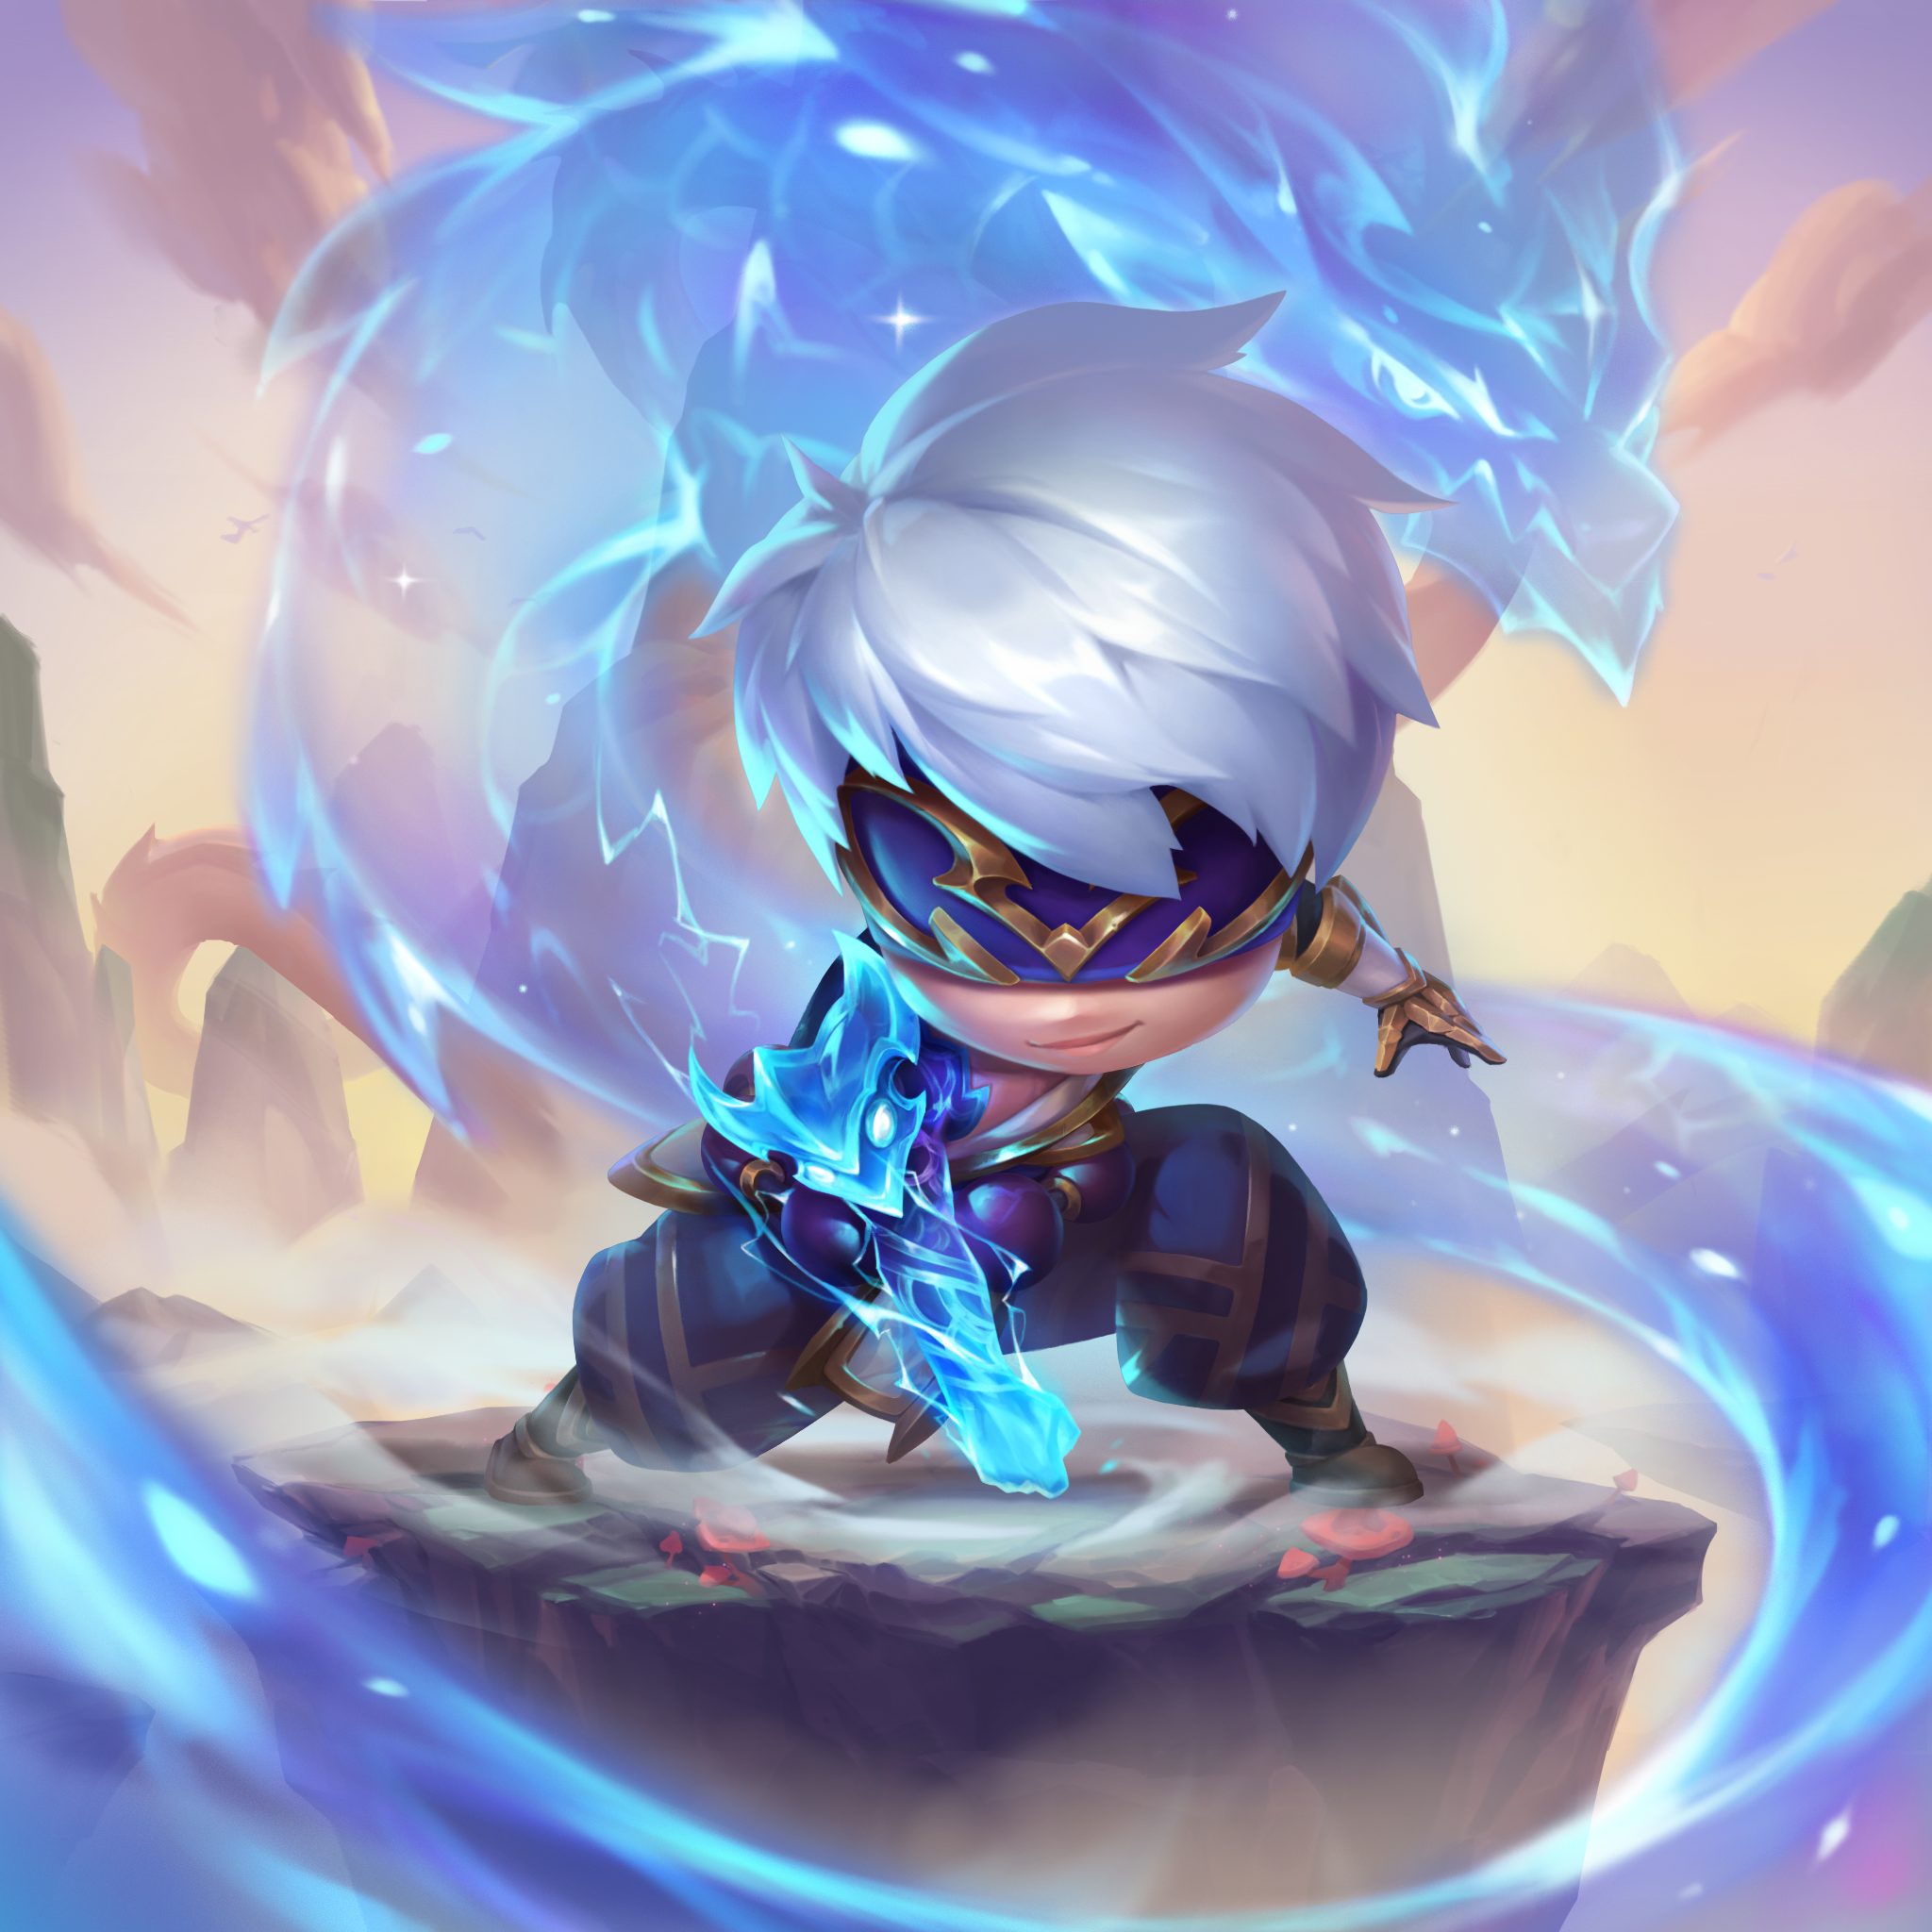 Upcoming TFT Set 9.5 Release Date